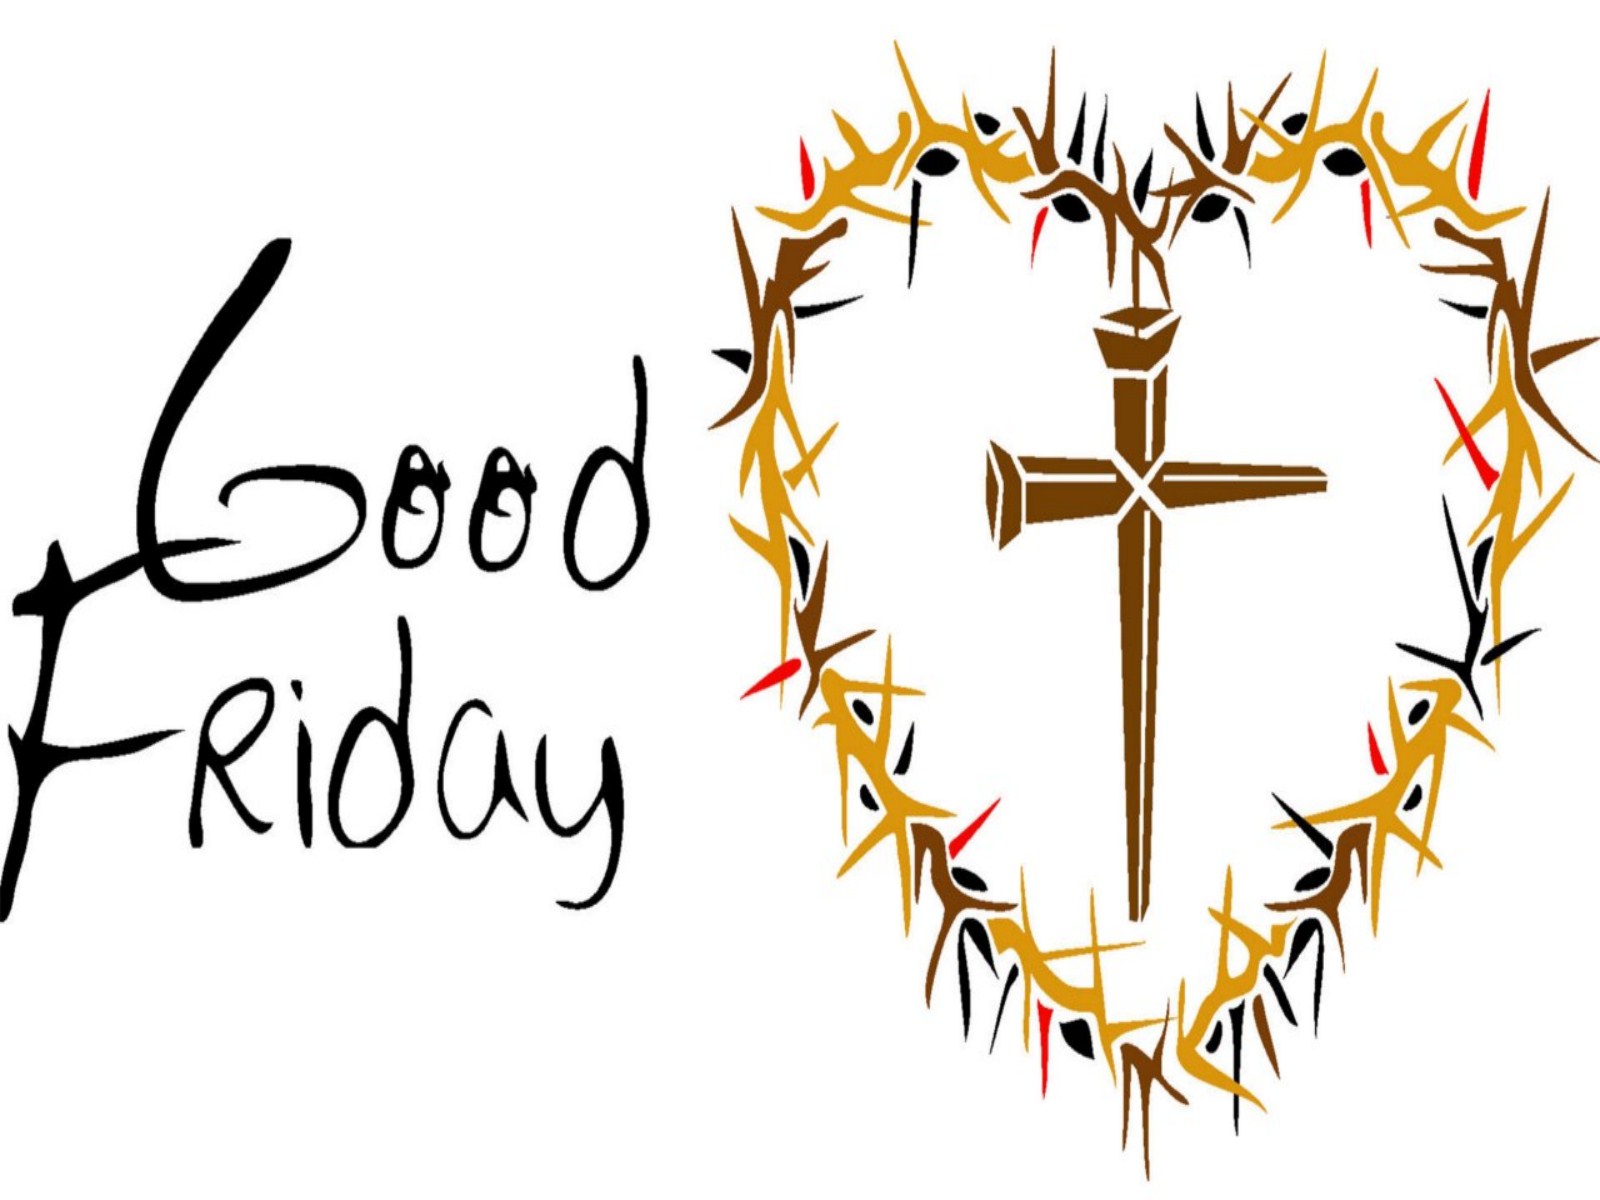 599 Good Friday free clipart.